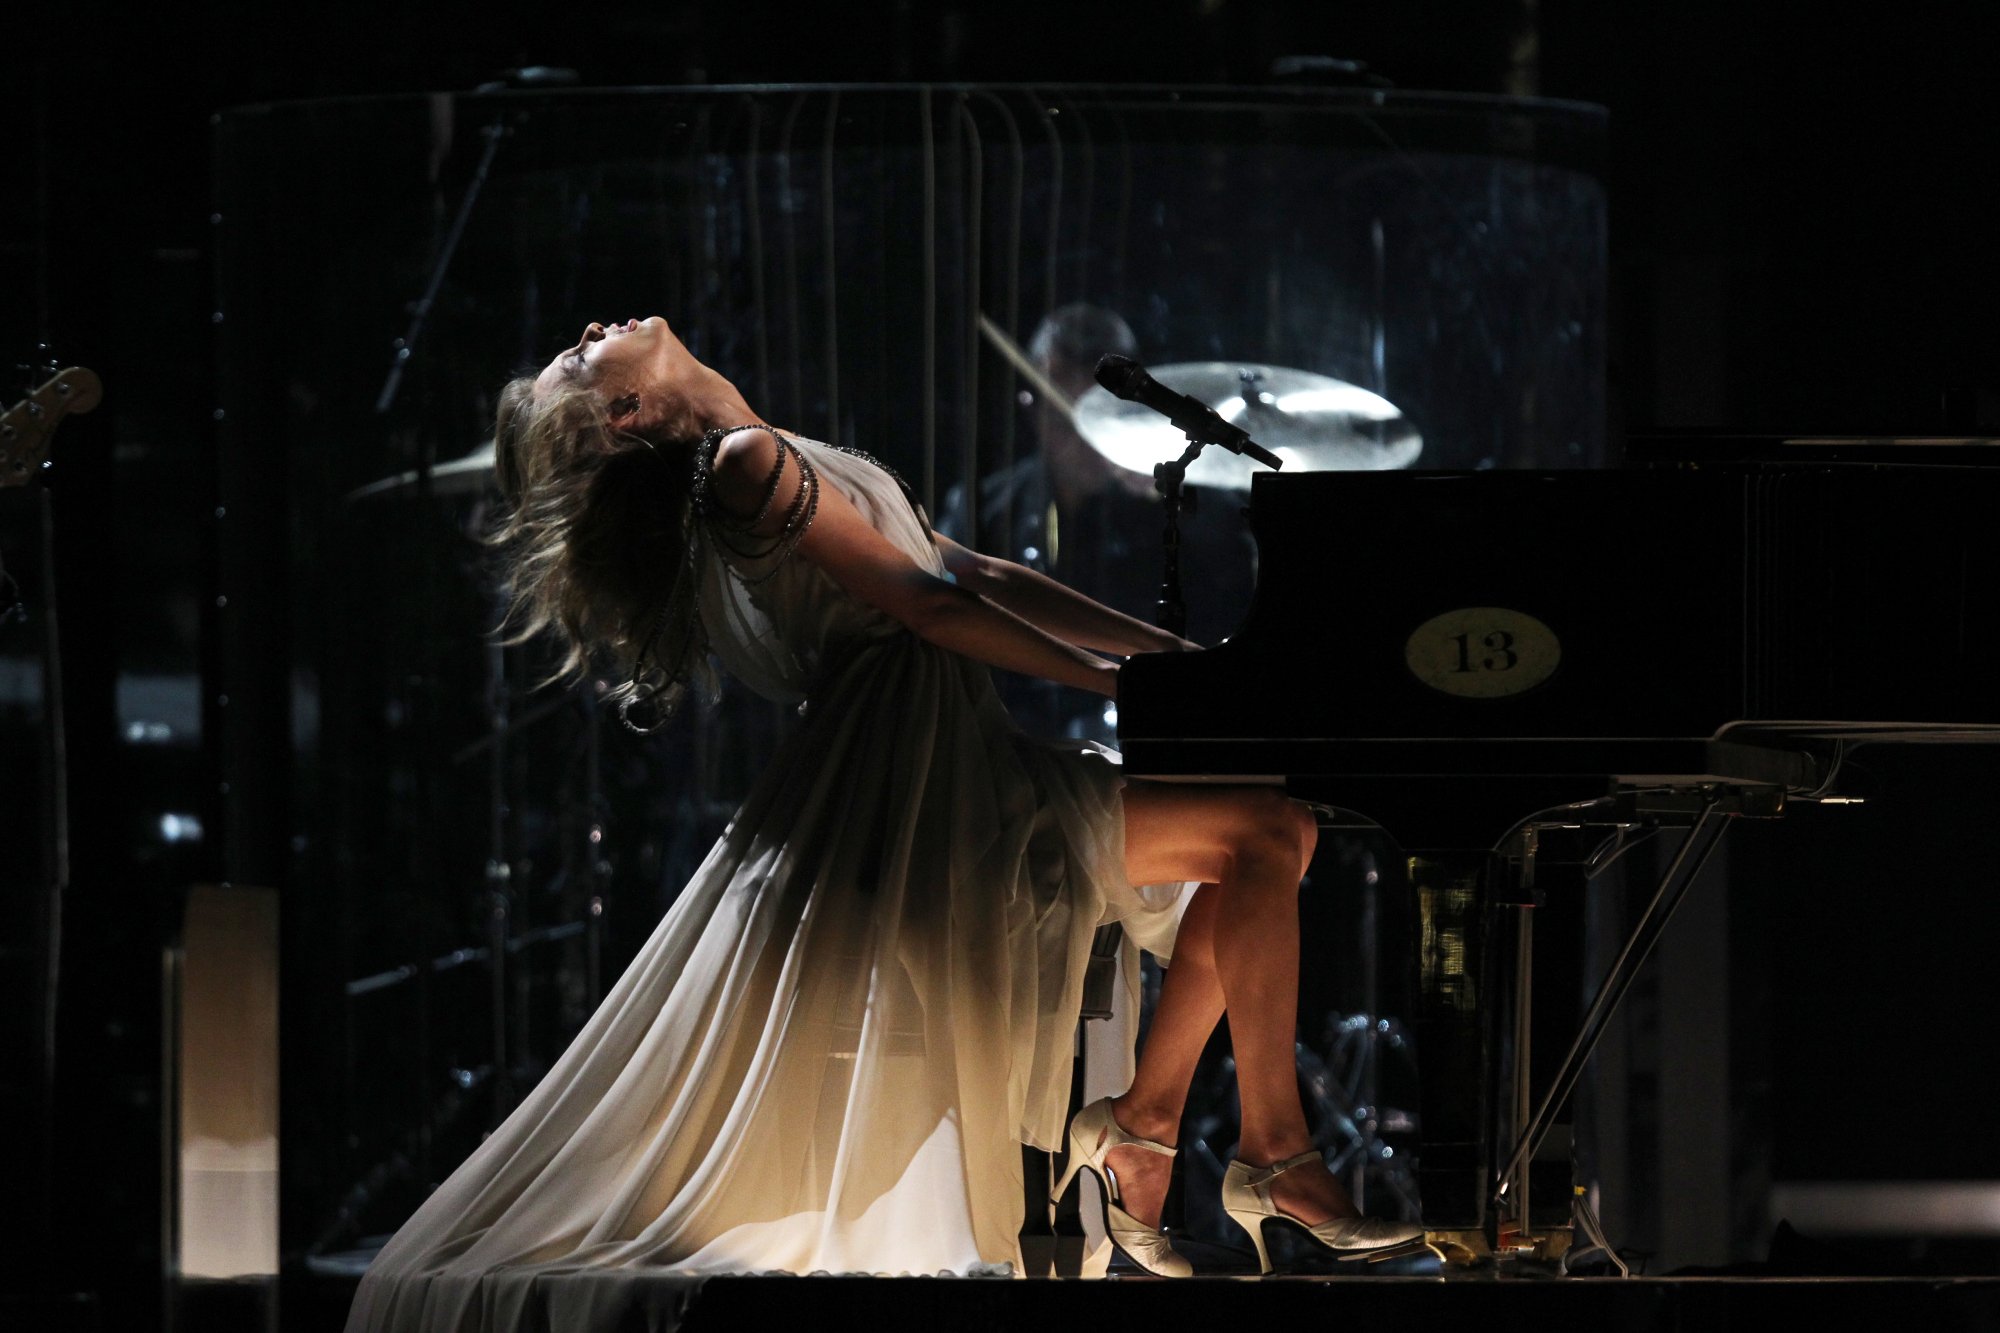 Taylor Swift performing "All Too Well" at THE 56TH ANNUAL GRAMMY AWARDS on Jan. 26 2014.